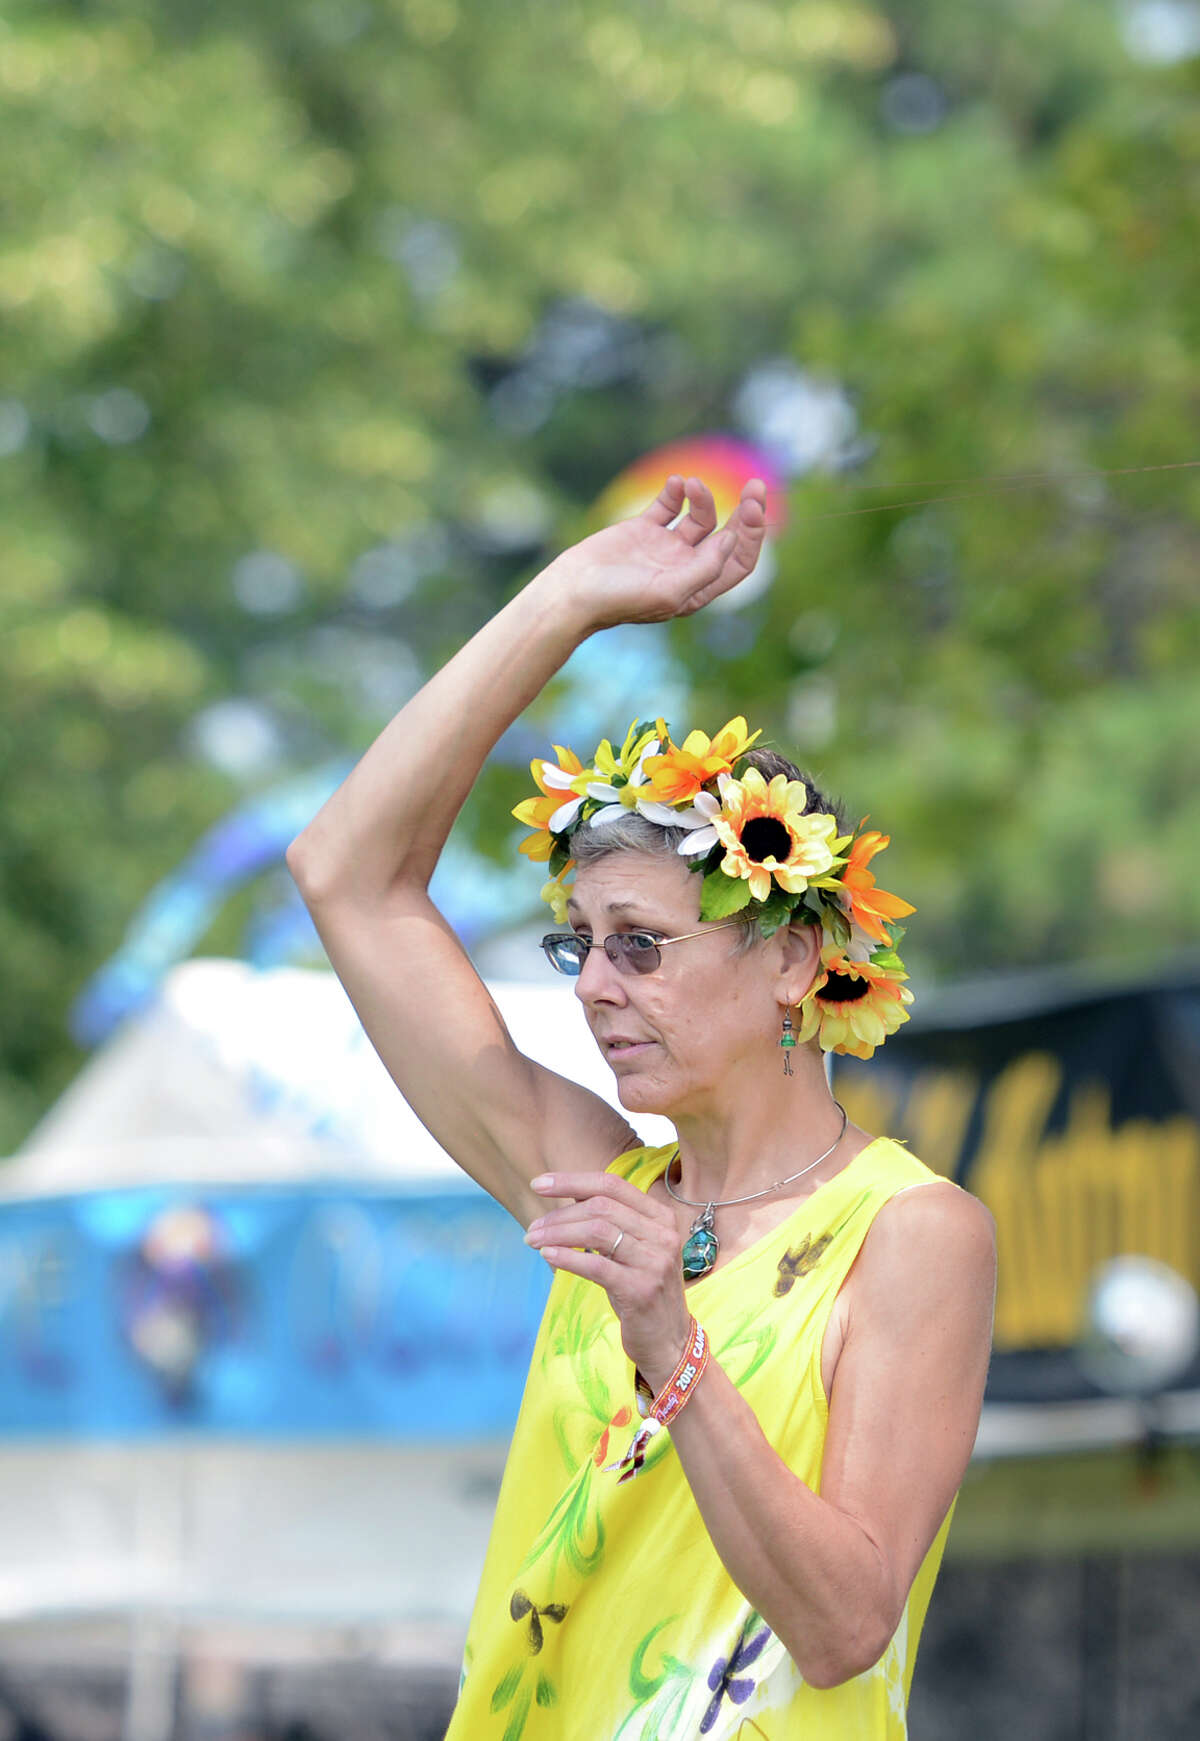 Tara Prindle, of Vernon, dances on the opening day of the 20th annual Gathering of the Vibes music festival Thursday, July 30, 2015 at Seaside Park in Bridgeport, Conn.